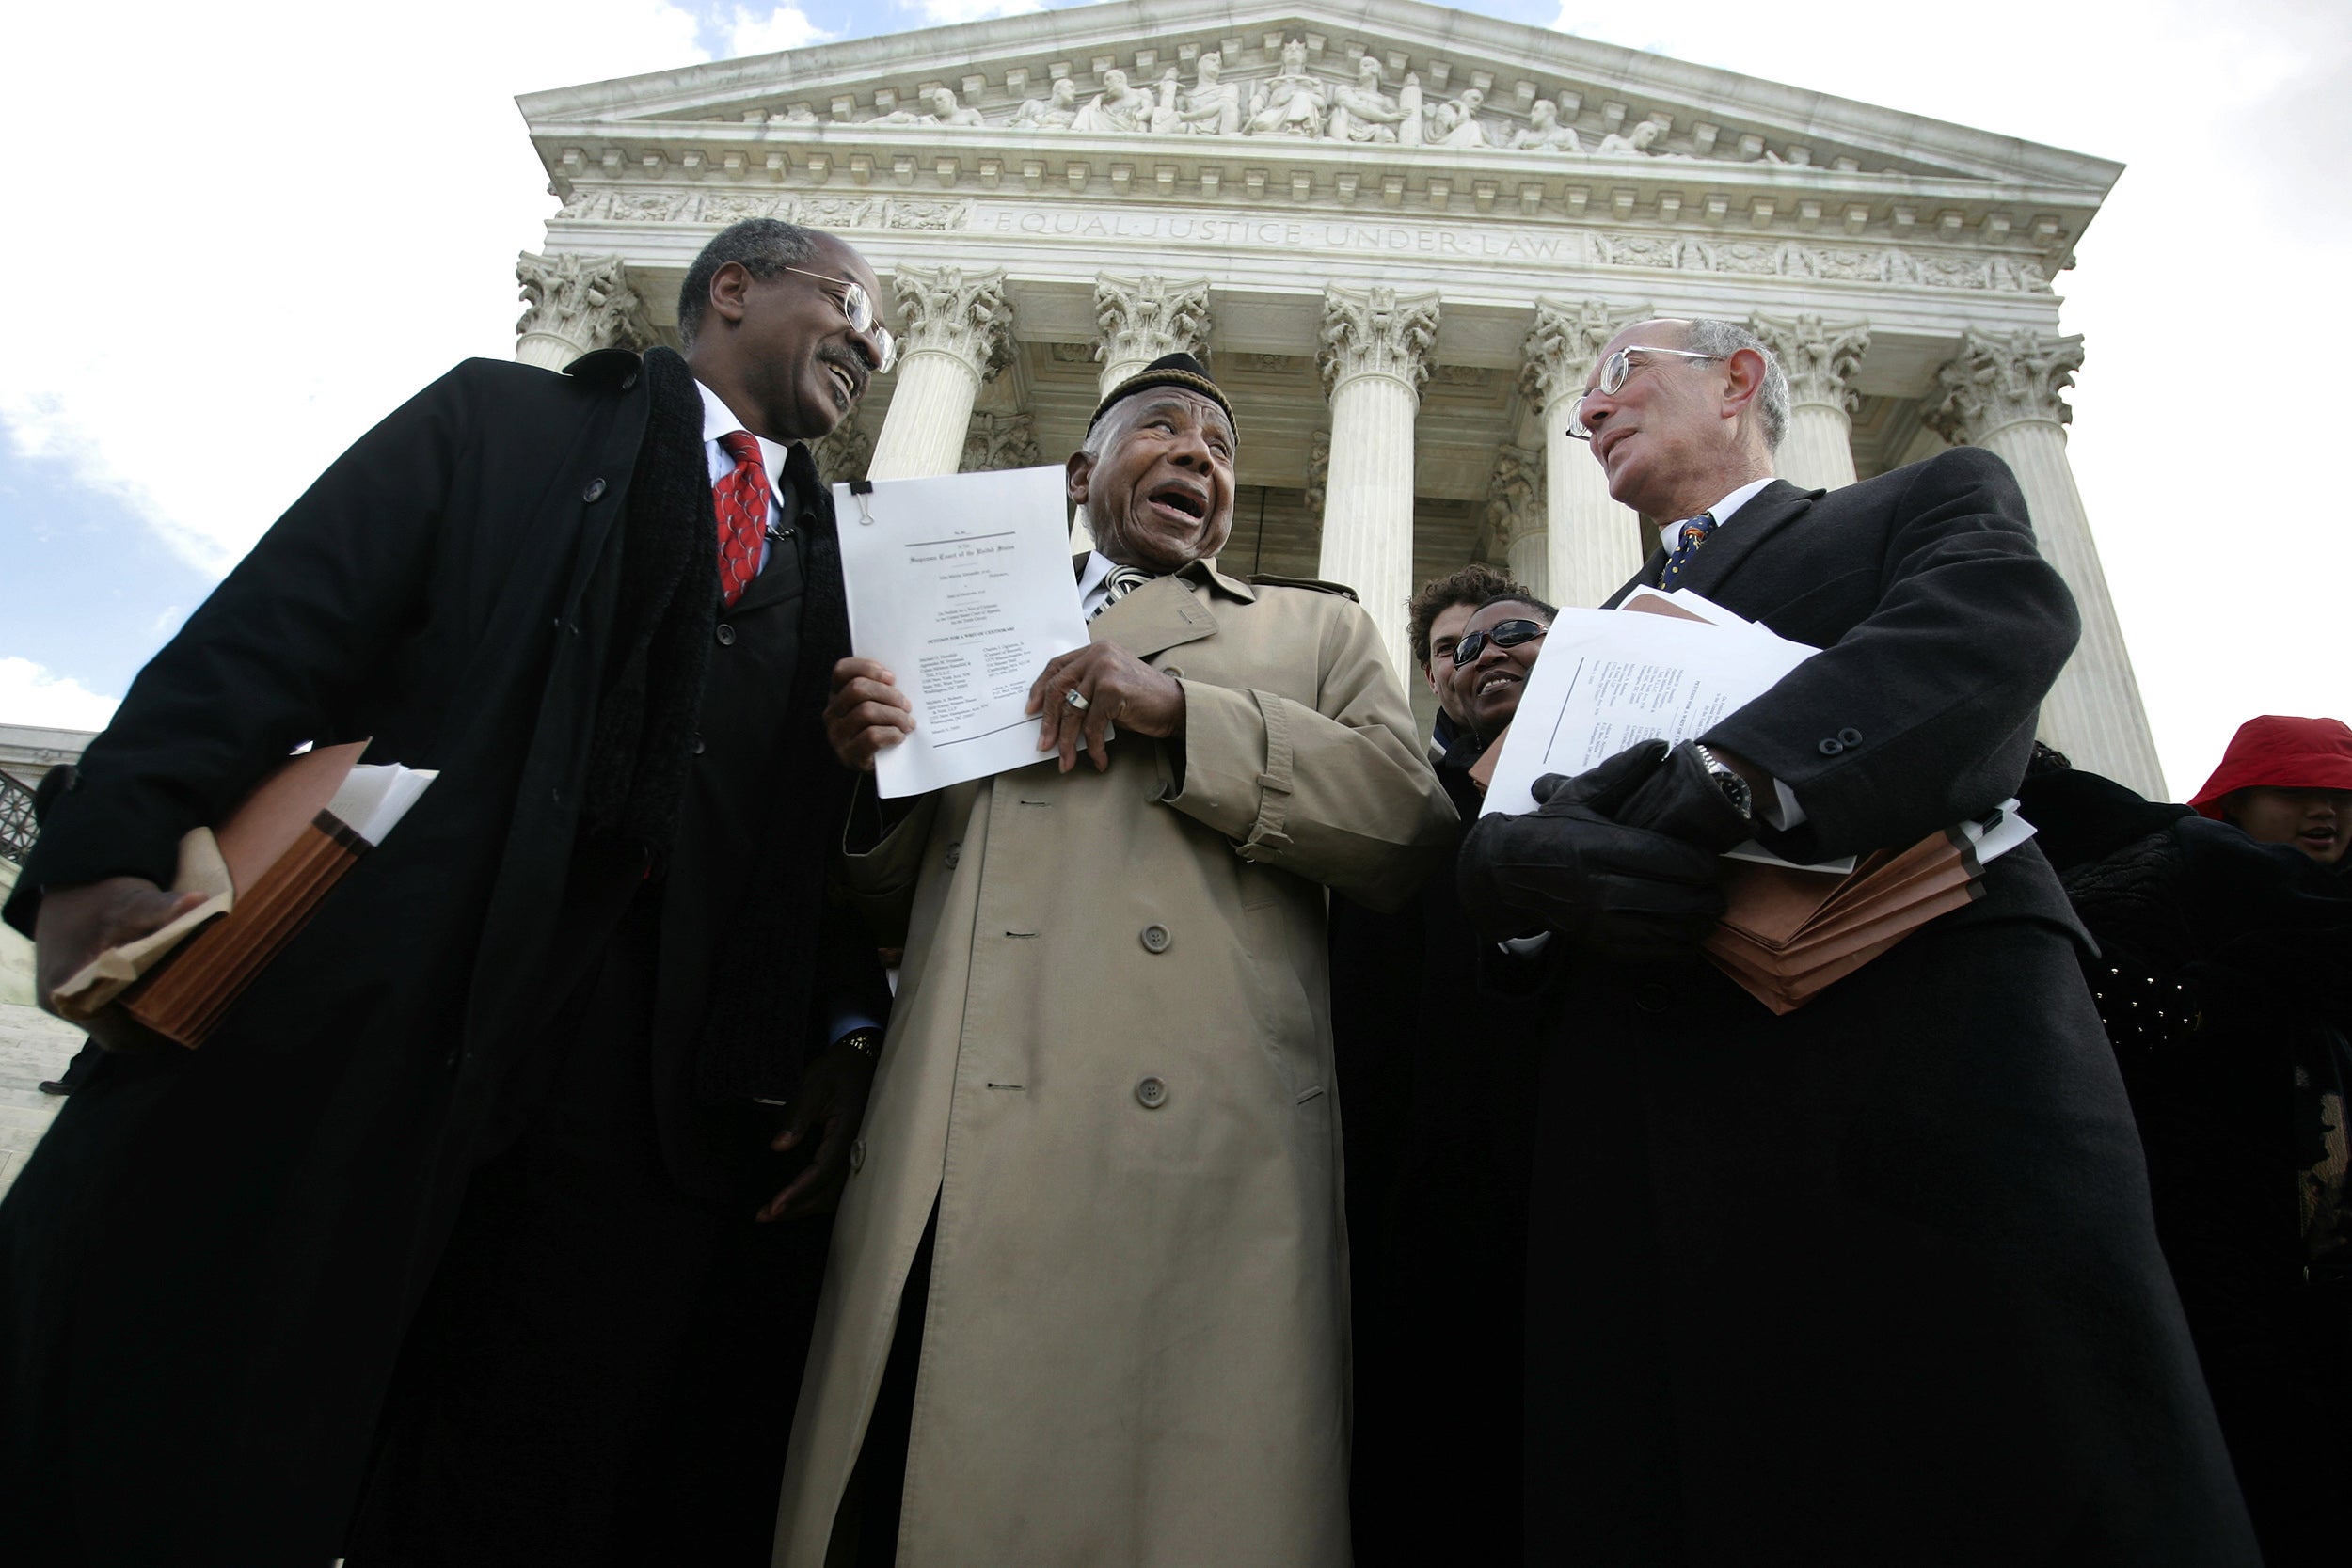 Charles Ogletree, Otis Clarke, and Michael Hausfeld outside Supreme Court in 2005. Clarke, a Tulsa riot survivor who was 102 at the time of this picture, looks emotional as he holds up the court brief.